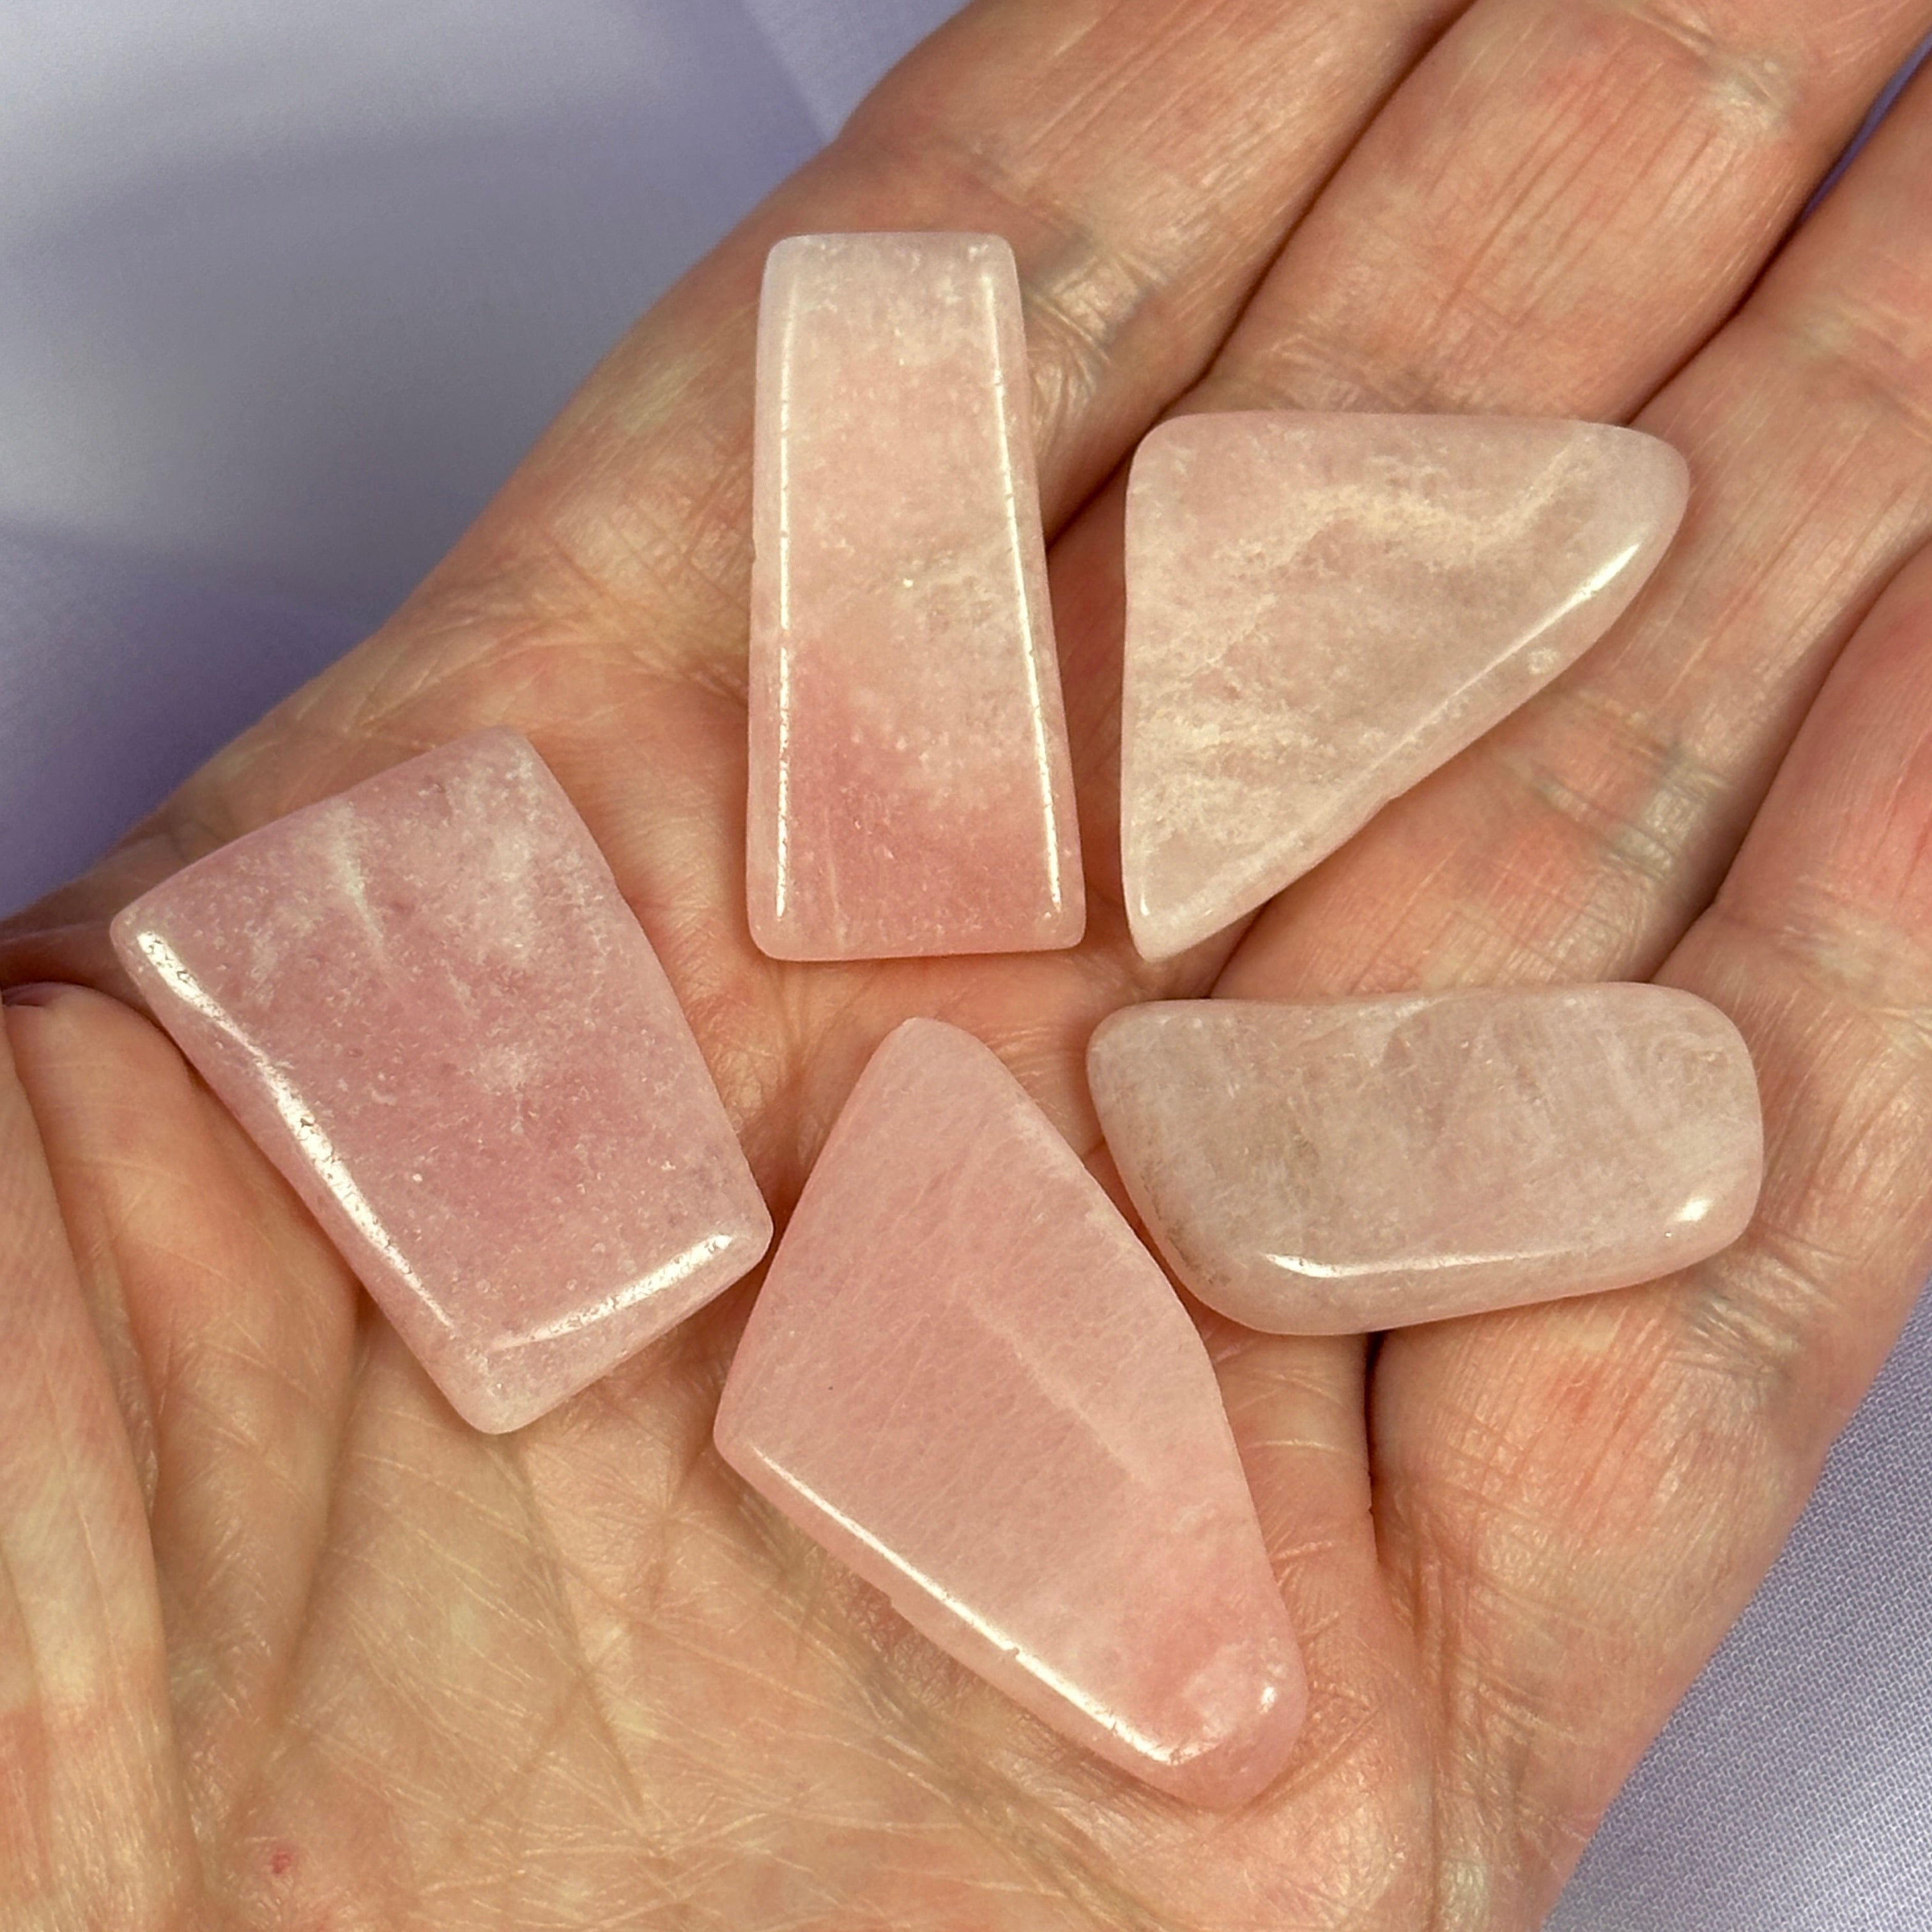 One beautiful colour small Pink Petalite crystal slice 4-6g SN50747